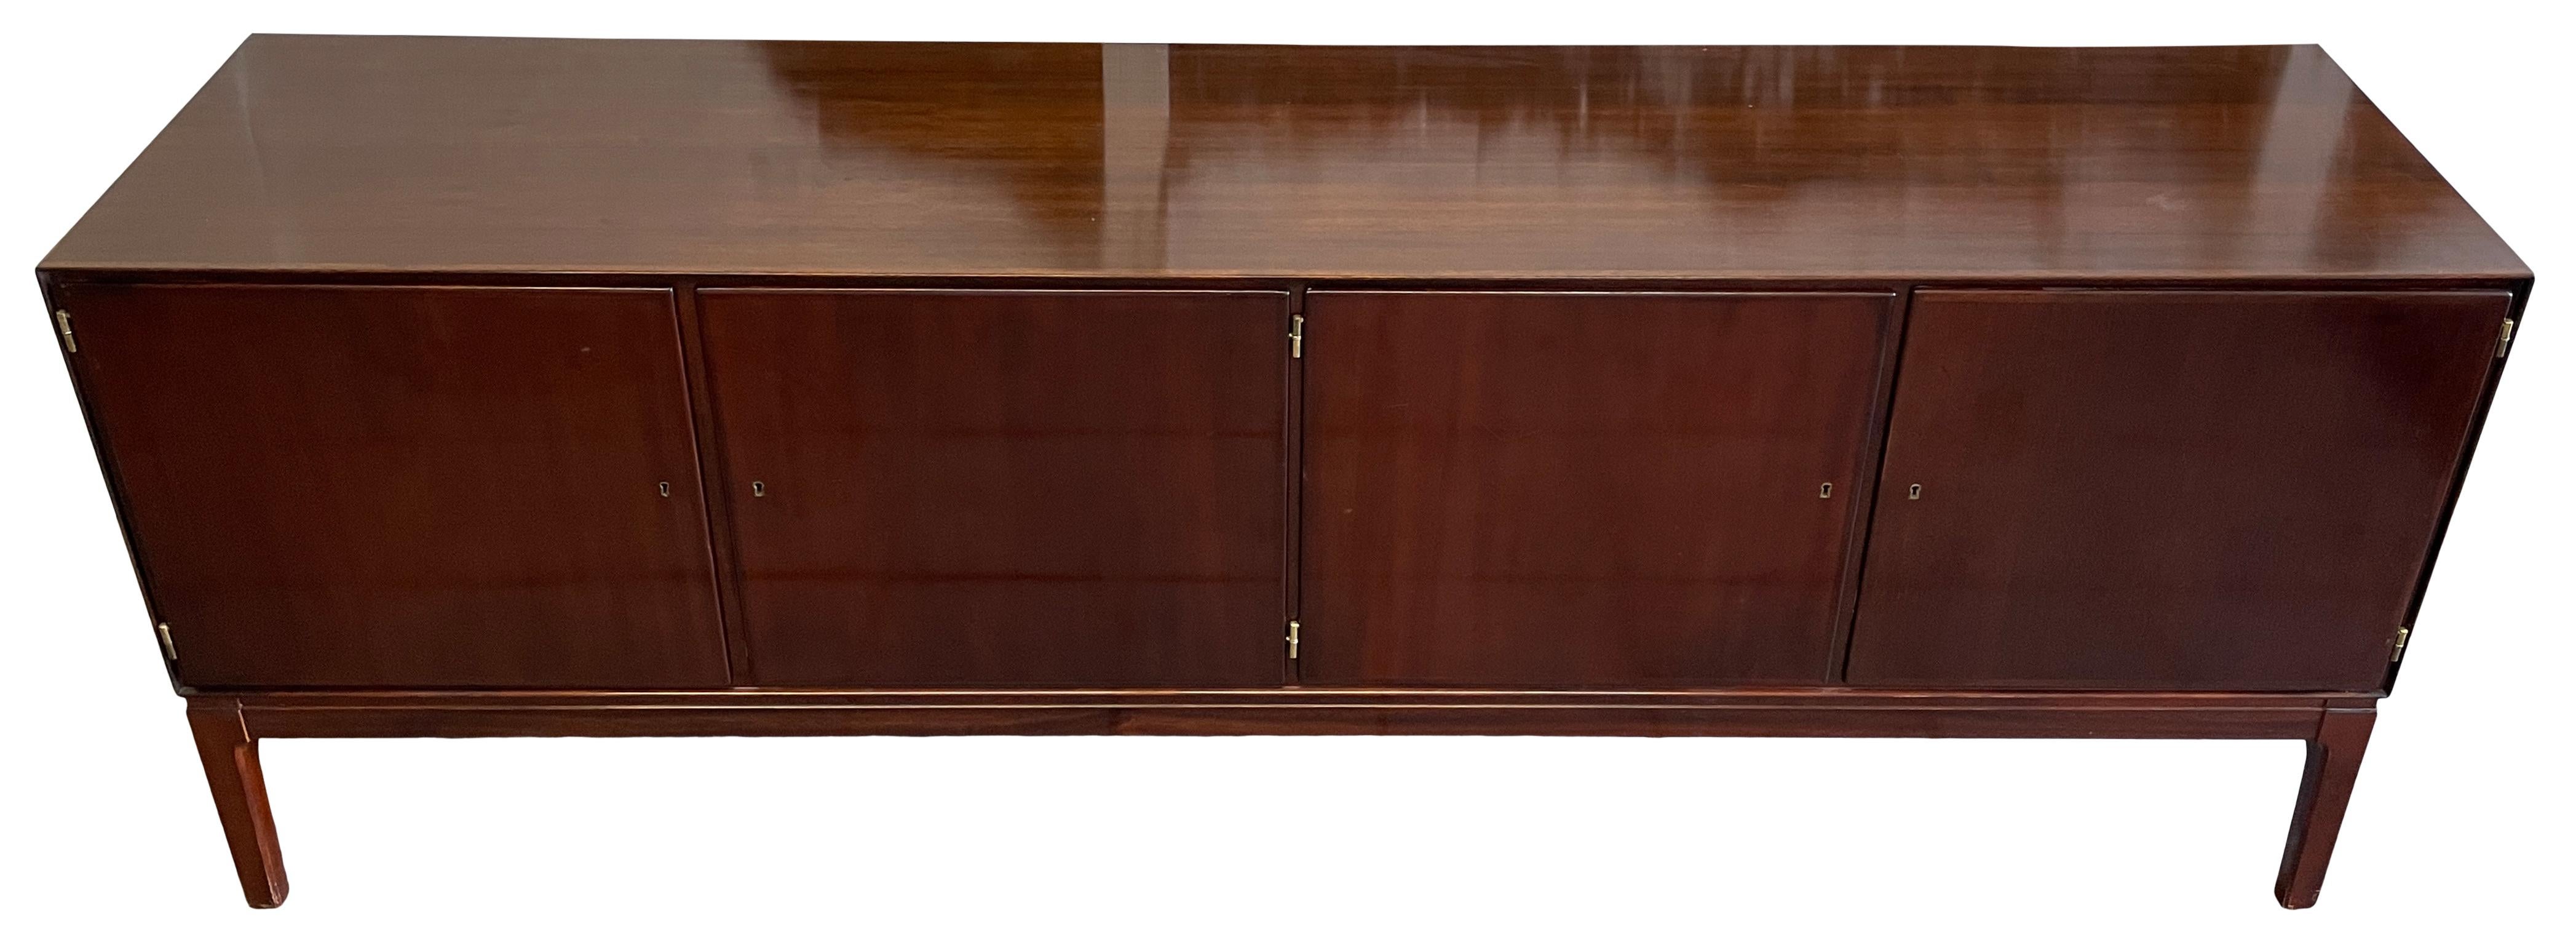 Midcentury long Danish modern teak credenza sideboard cabinet with 4 doors and 6 sliding drawers/trays 3 have green felt also has 5 adjustable shelves. Very clean teak wood credenza with rosewood finish. Has keyed locking teak front doors. Very